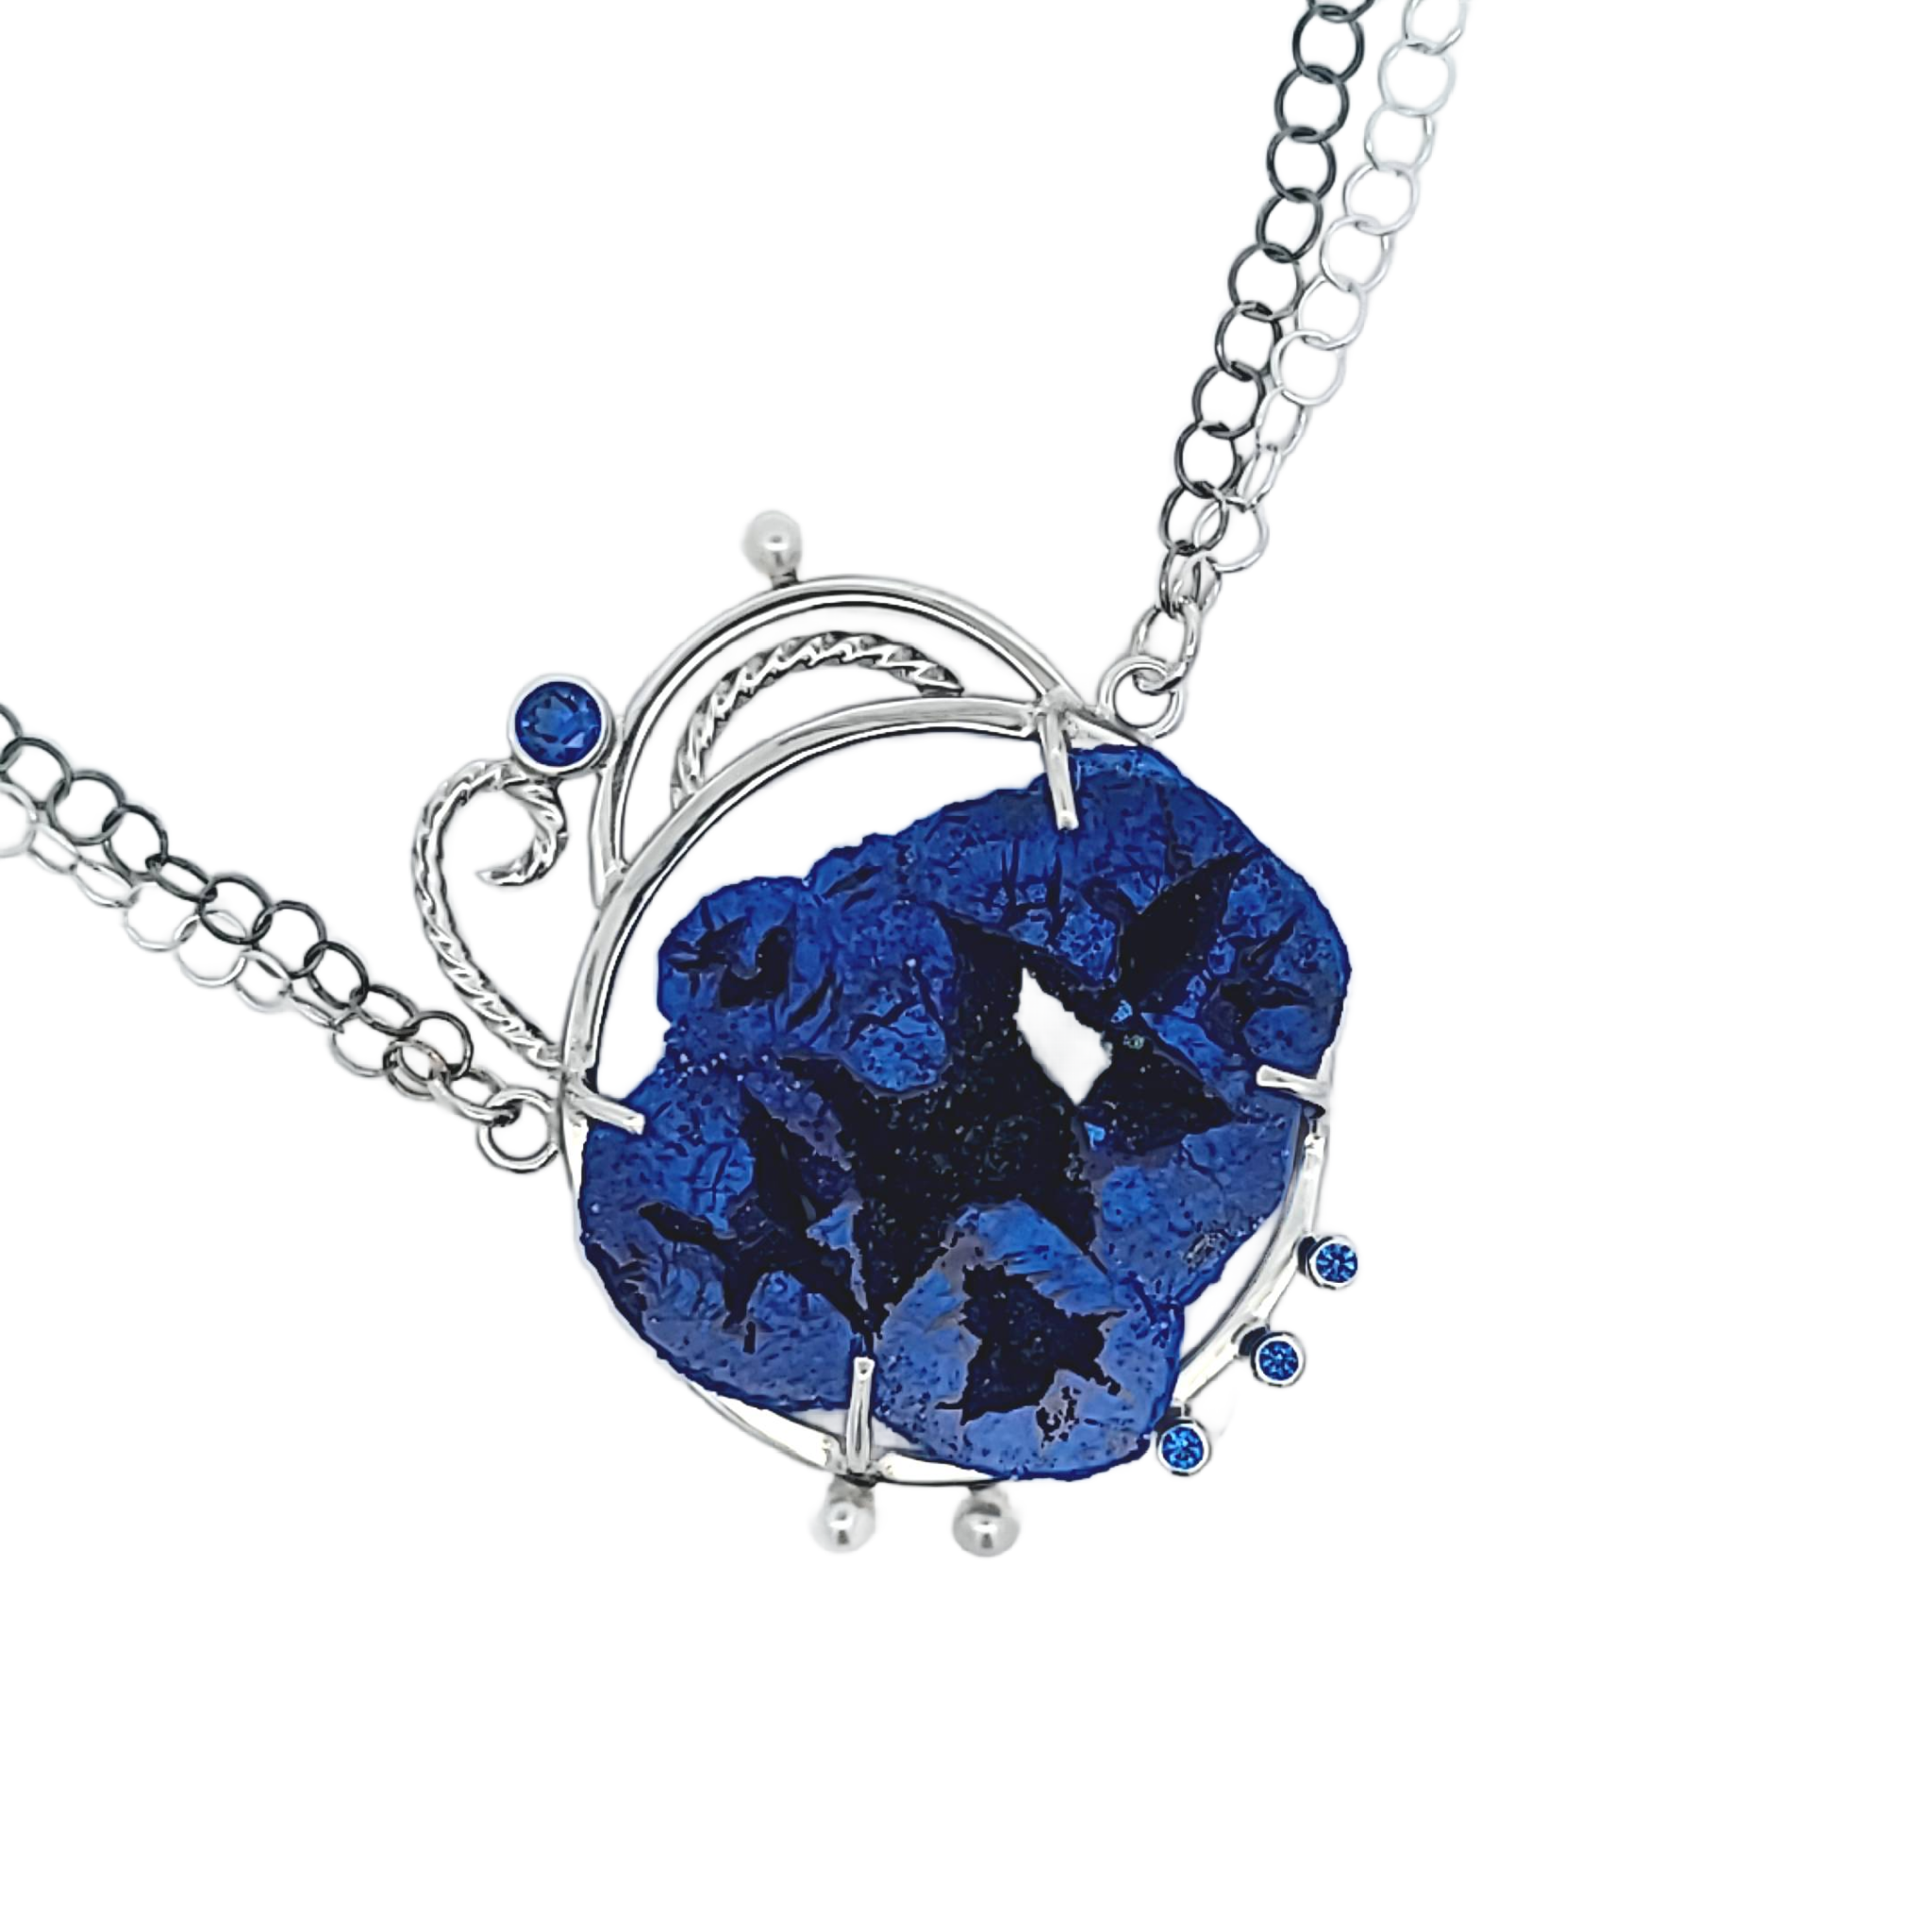 Azurite, Sapphire Cubic Zirconia and Freshwater Pearl Pendant